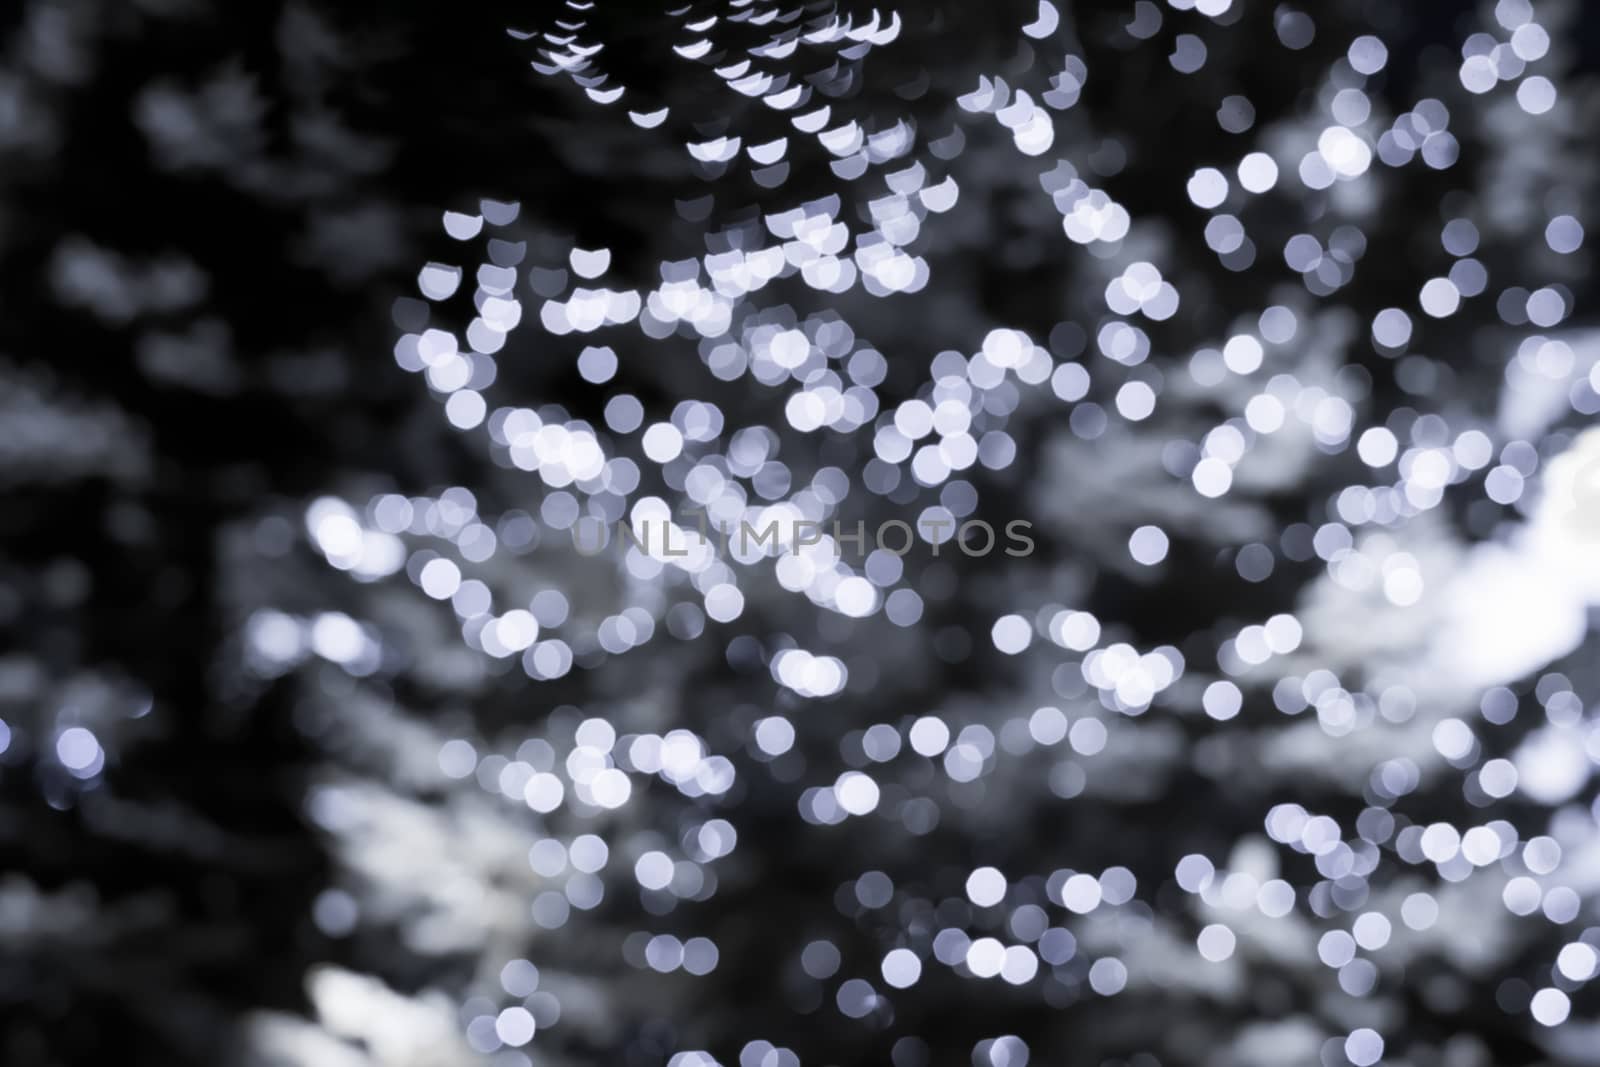 Blurred decorated lights for elegant party, out of focus lights